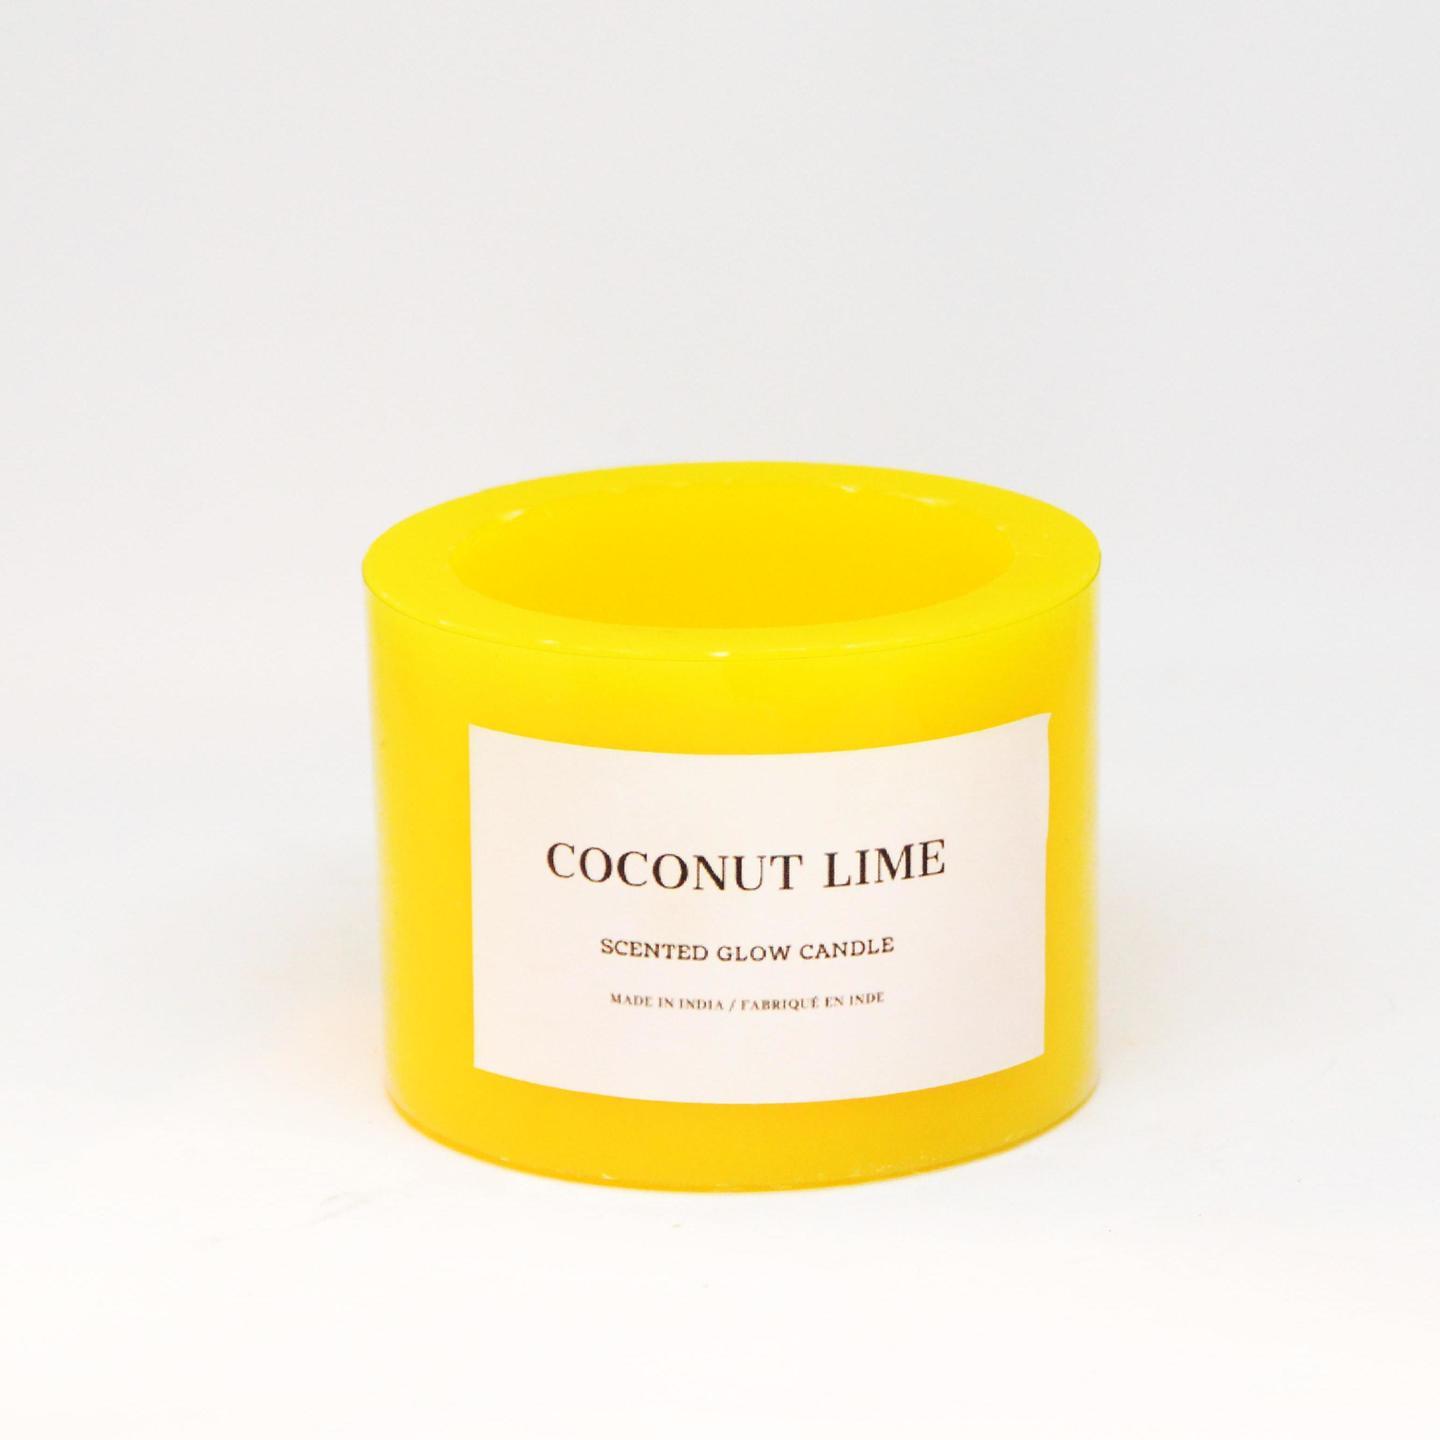 Scented Glow Candle - Coconut Lime